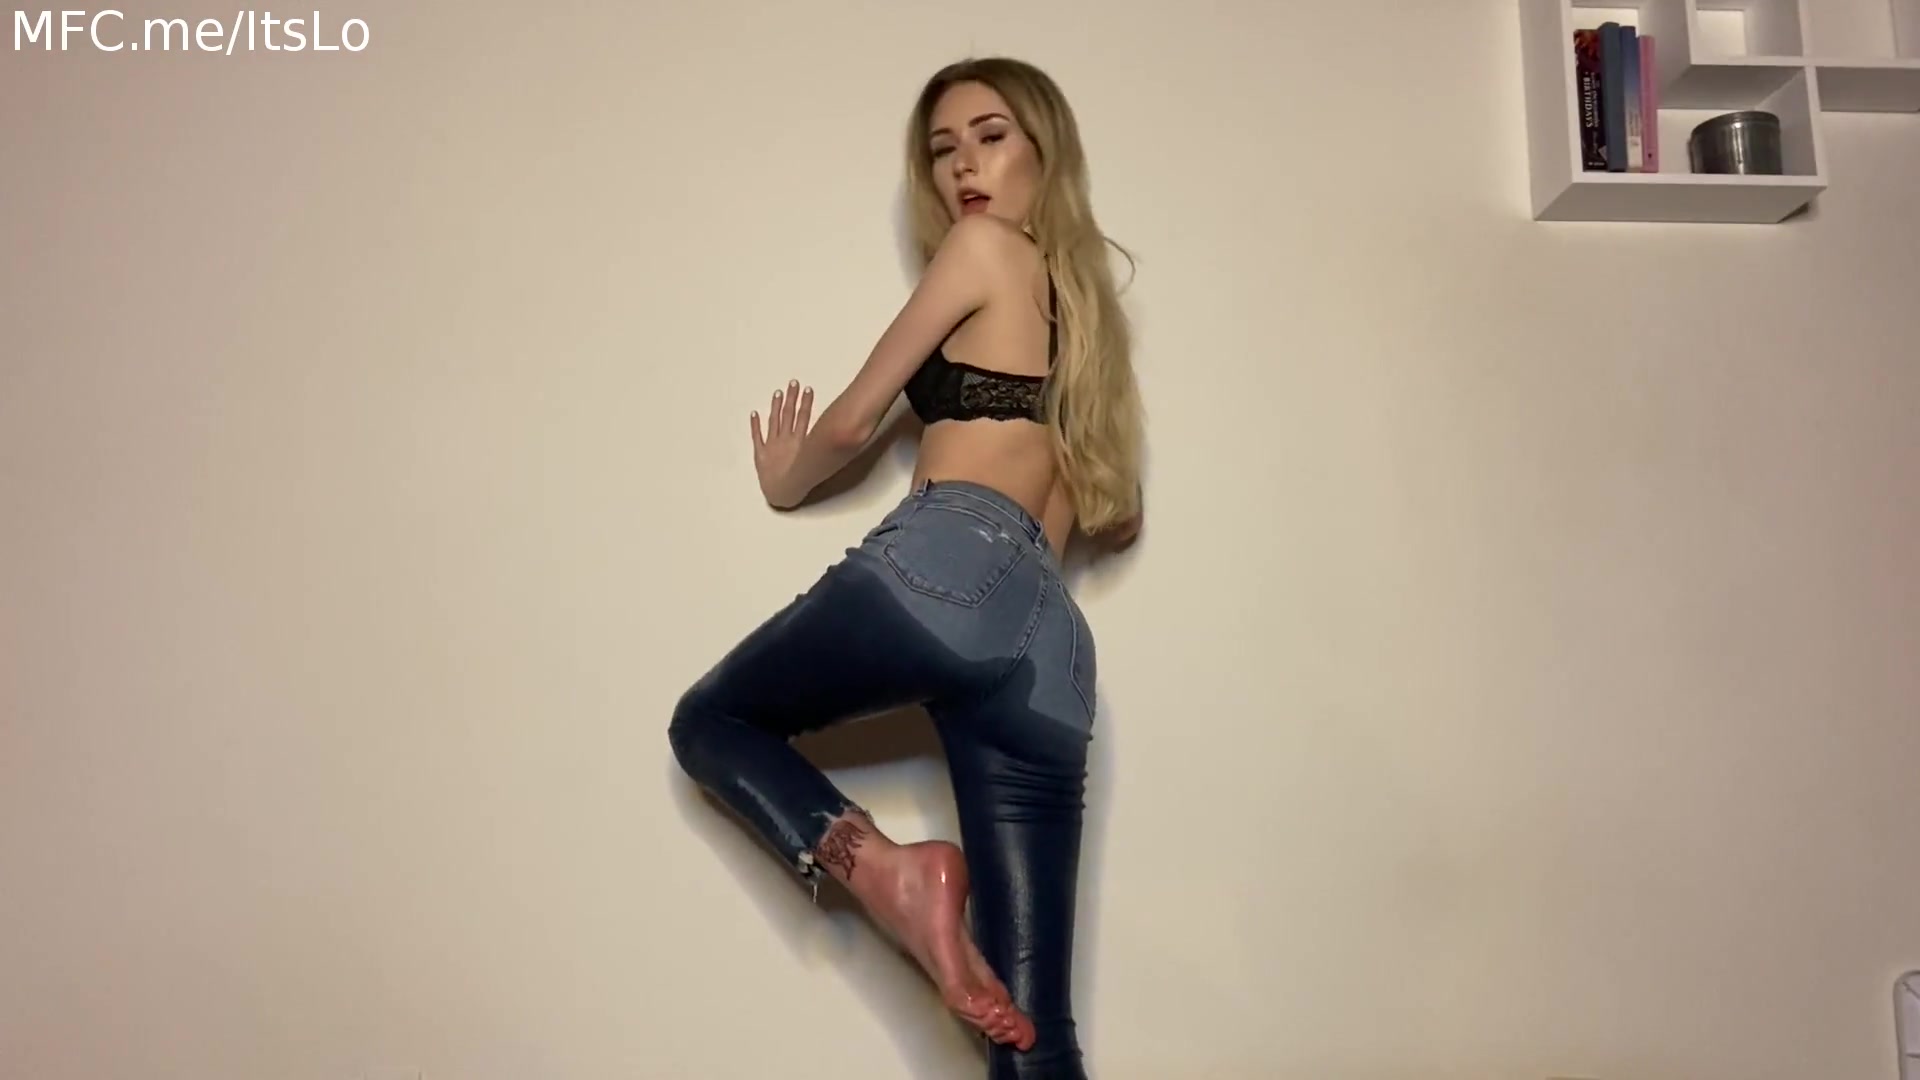 Wetting her jeans - video 2